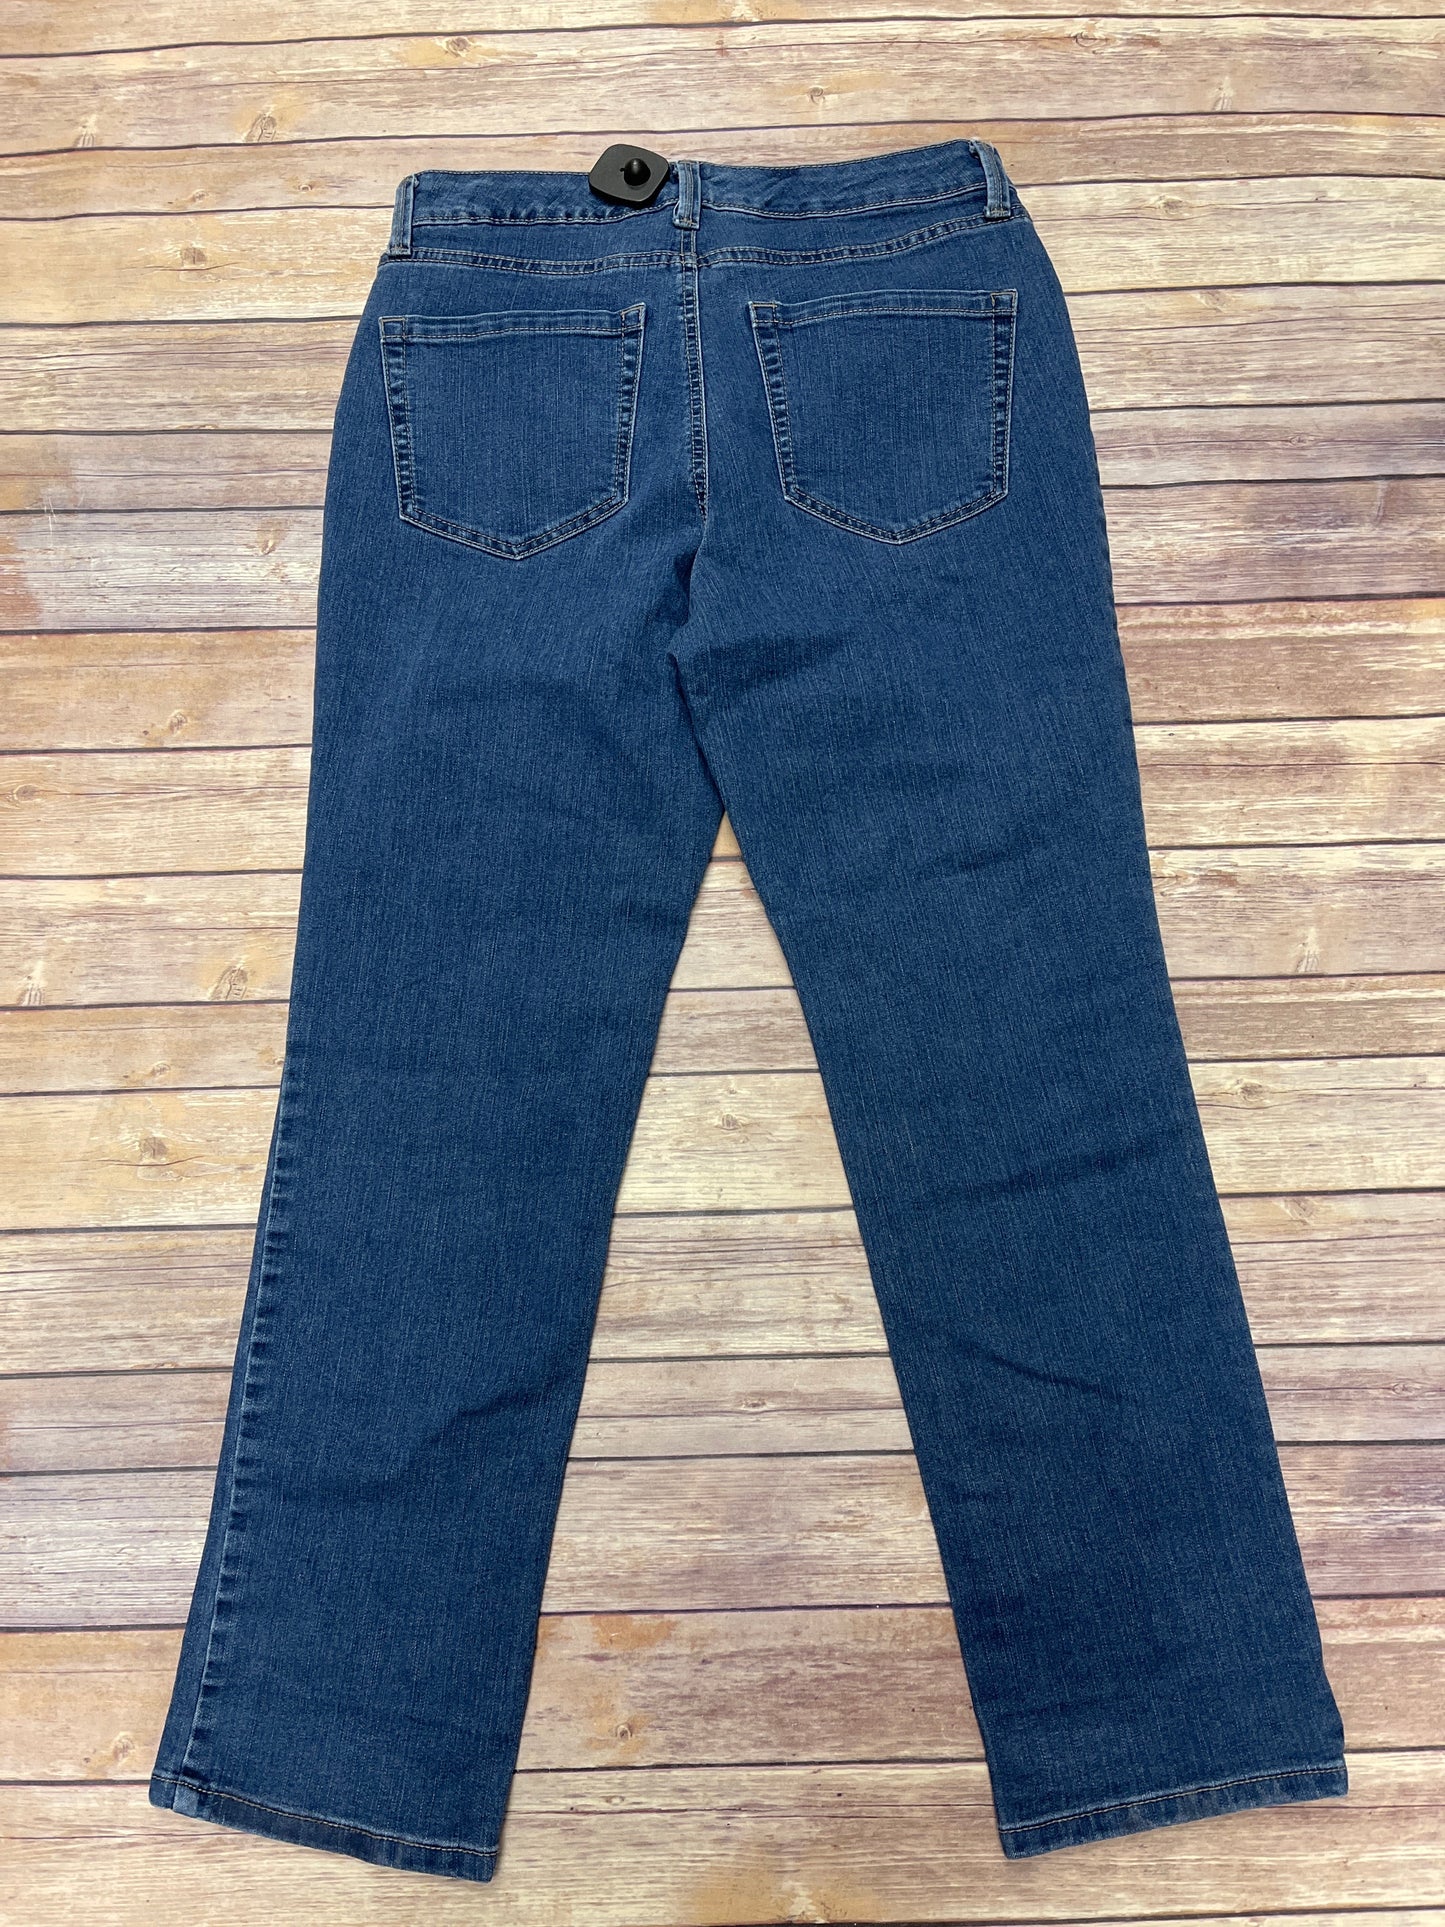 Jeans Straight By Charter Club  Size: 8 Short